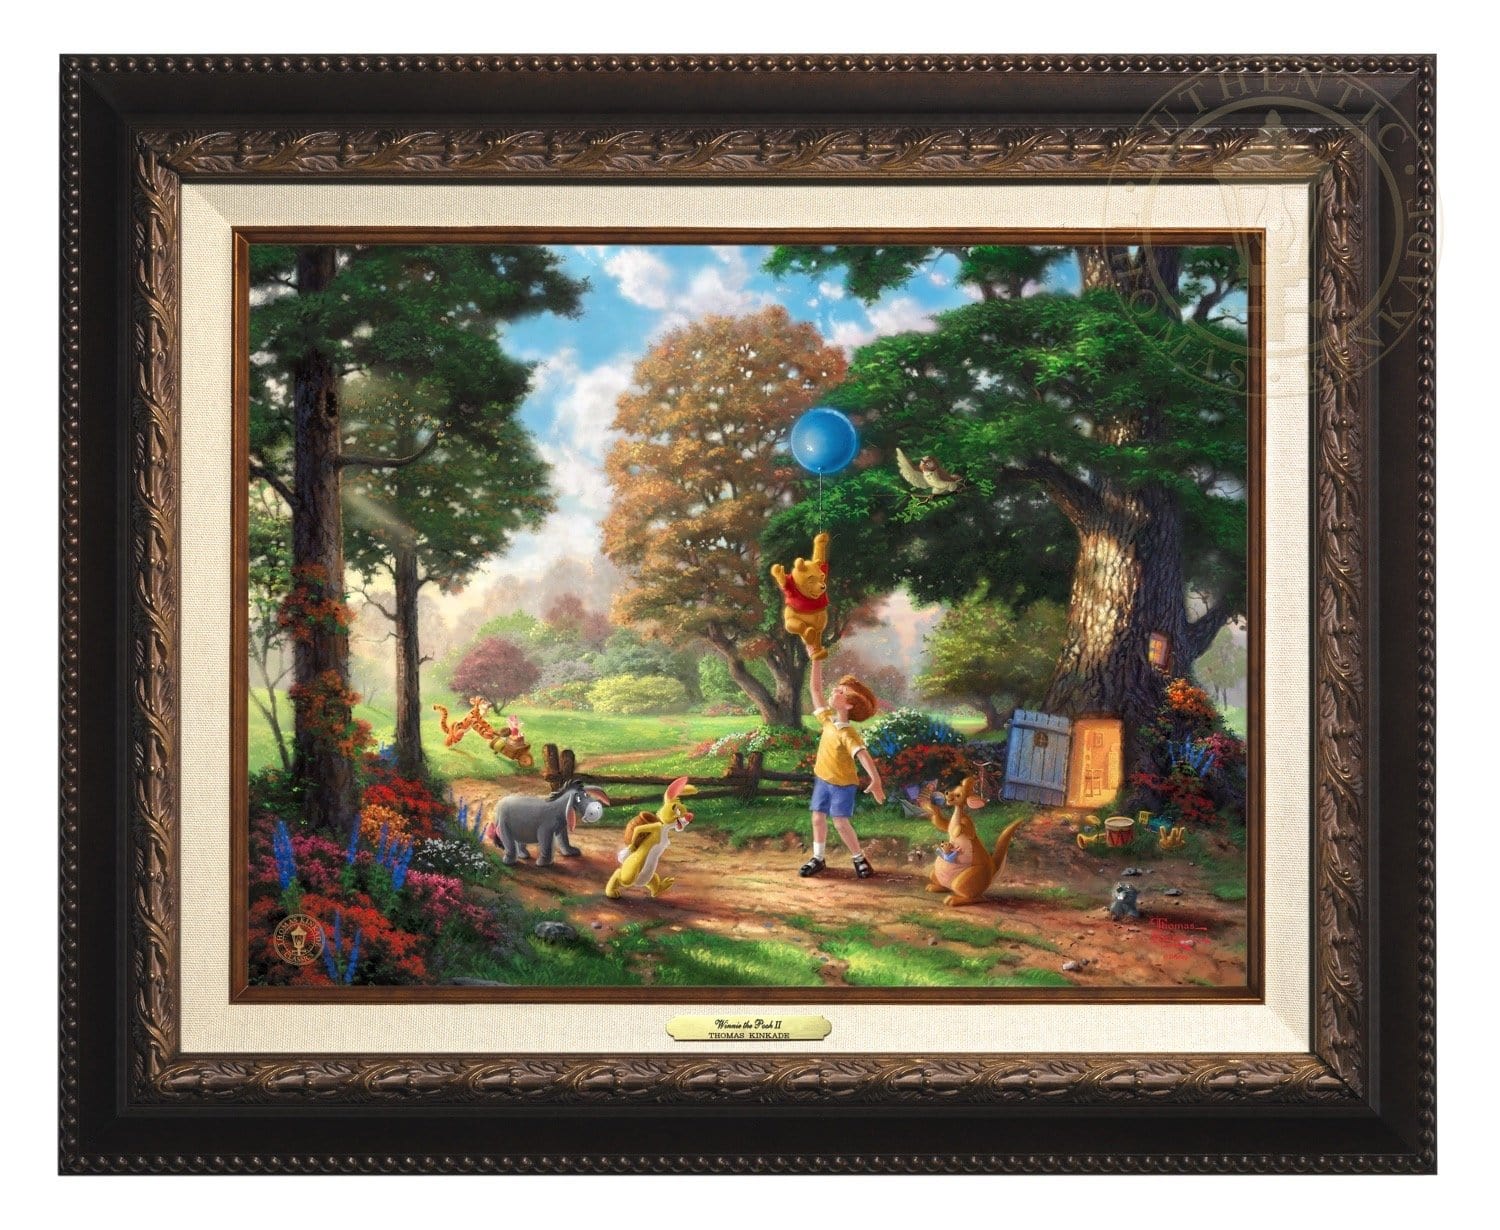 Winnie the Pooh II - Christopher Robin, Winnie the Pooh and the delightful menagerie of friends as they all adventured in the Hundred Acre Wood - Aged Bronze Frame.